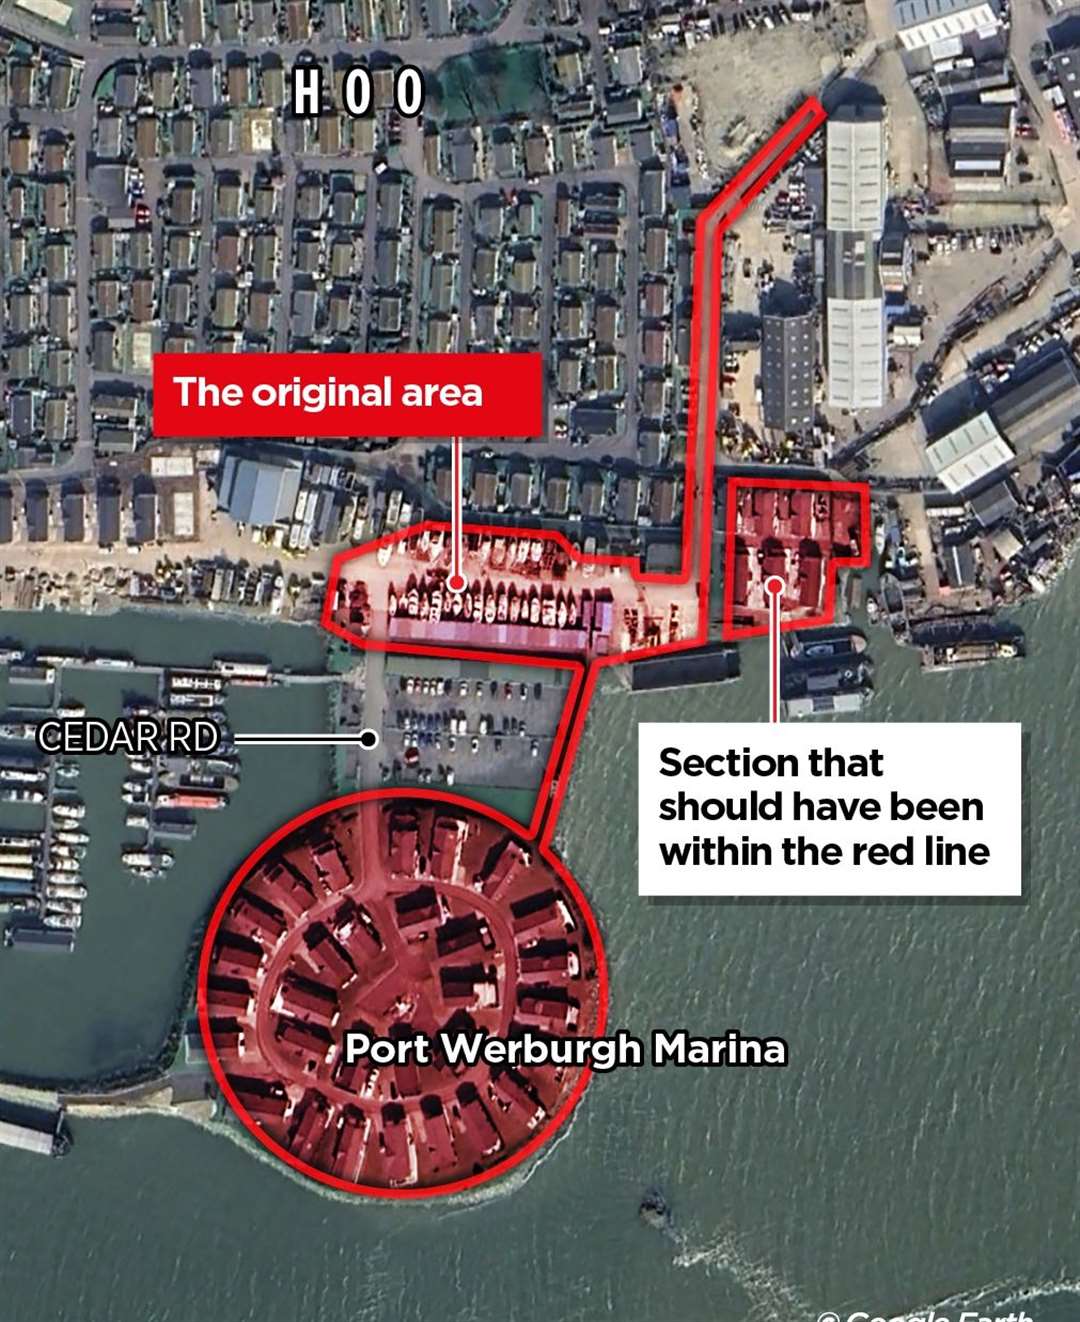 The graphic shows the area of land with planning permission on Port Werburgh Marina, including the section which should have been within the red line